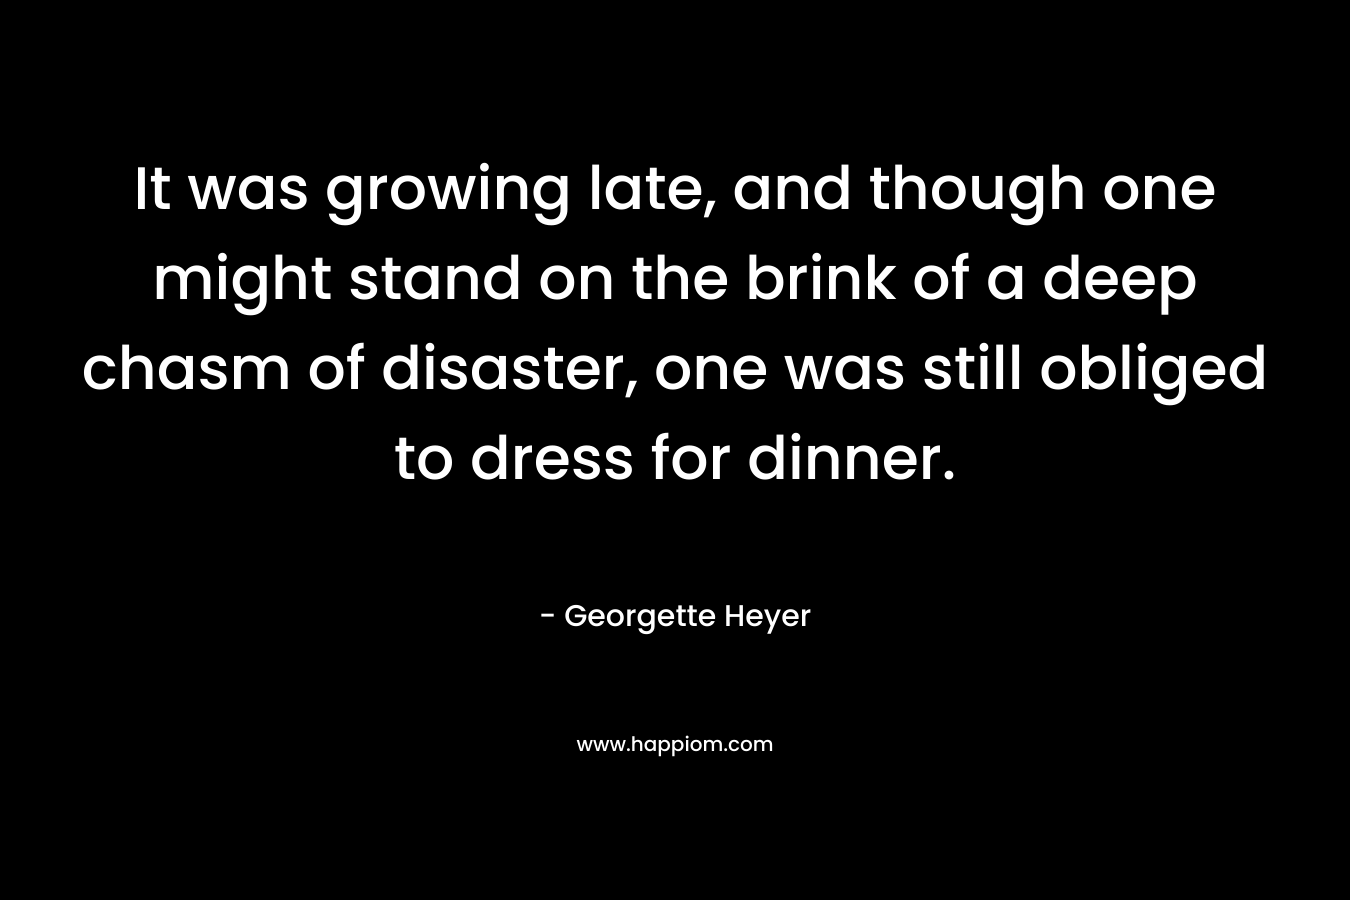 It was growing late, and though one might stand on the brink of a deep chasm of disaster, one was still obliged to dress for dinner. – Georgette Heyer